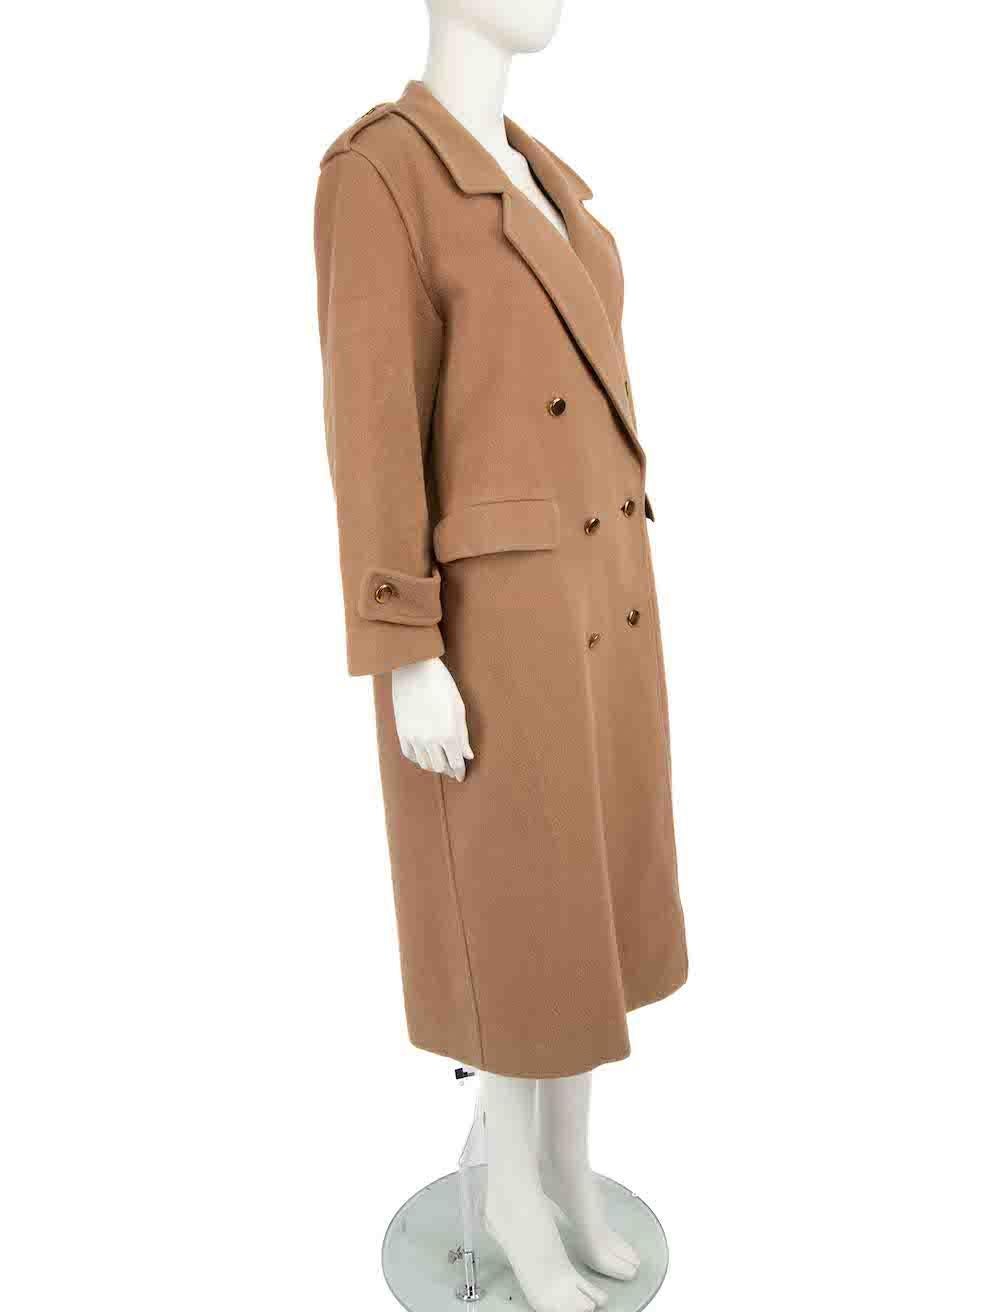 CONDITION is Good. General wear to coat is evident. Moderate signs of wear to the lining with two small holes at the rear neckline and the exterior fastening buttons have scratches to the metal. The wool texture is thinning at the front and back,